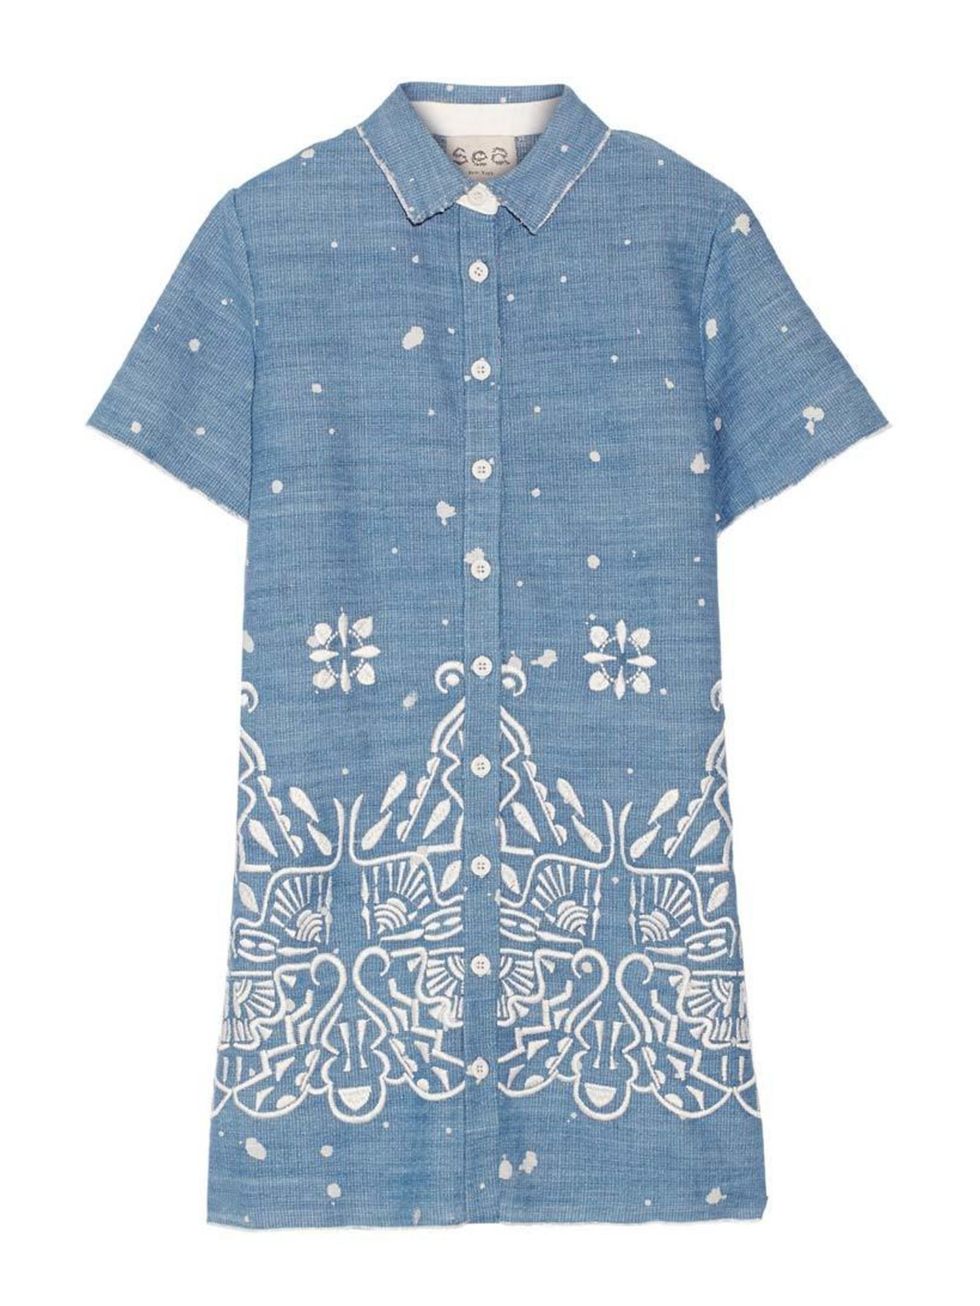 <p>Wear with gladiator sandals and gold jewellery.</p>

<p>Sea NY dress, £405 at <a href="http://www.net-a-porter.com/product/541924/SEA/embroidered-denim-mini-dress" target="_blank">Net-A-Porter</a></p>